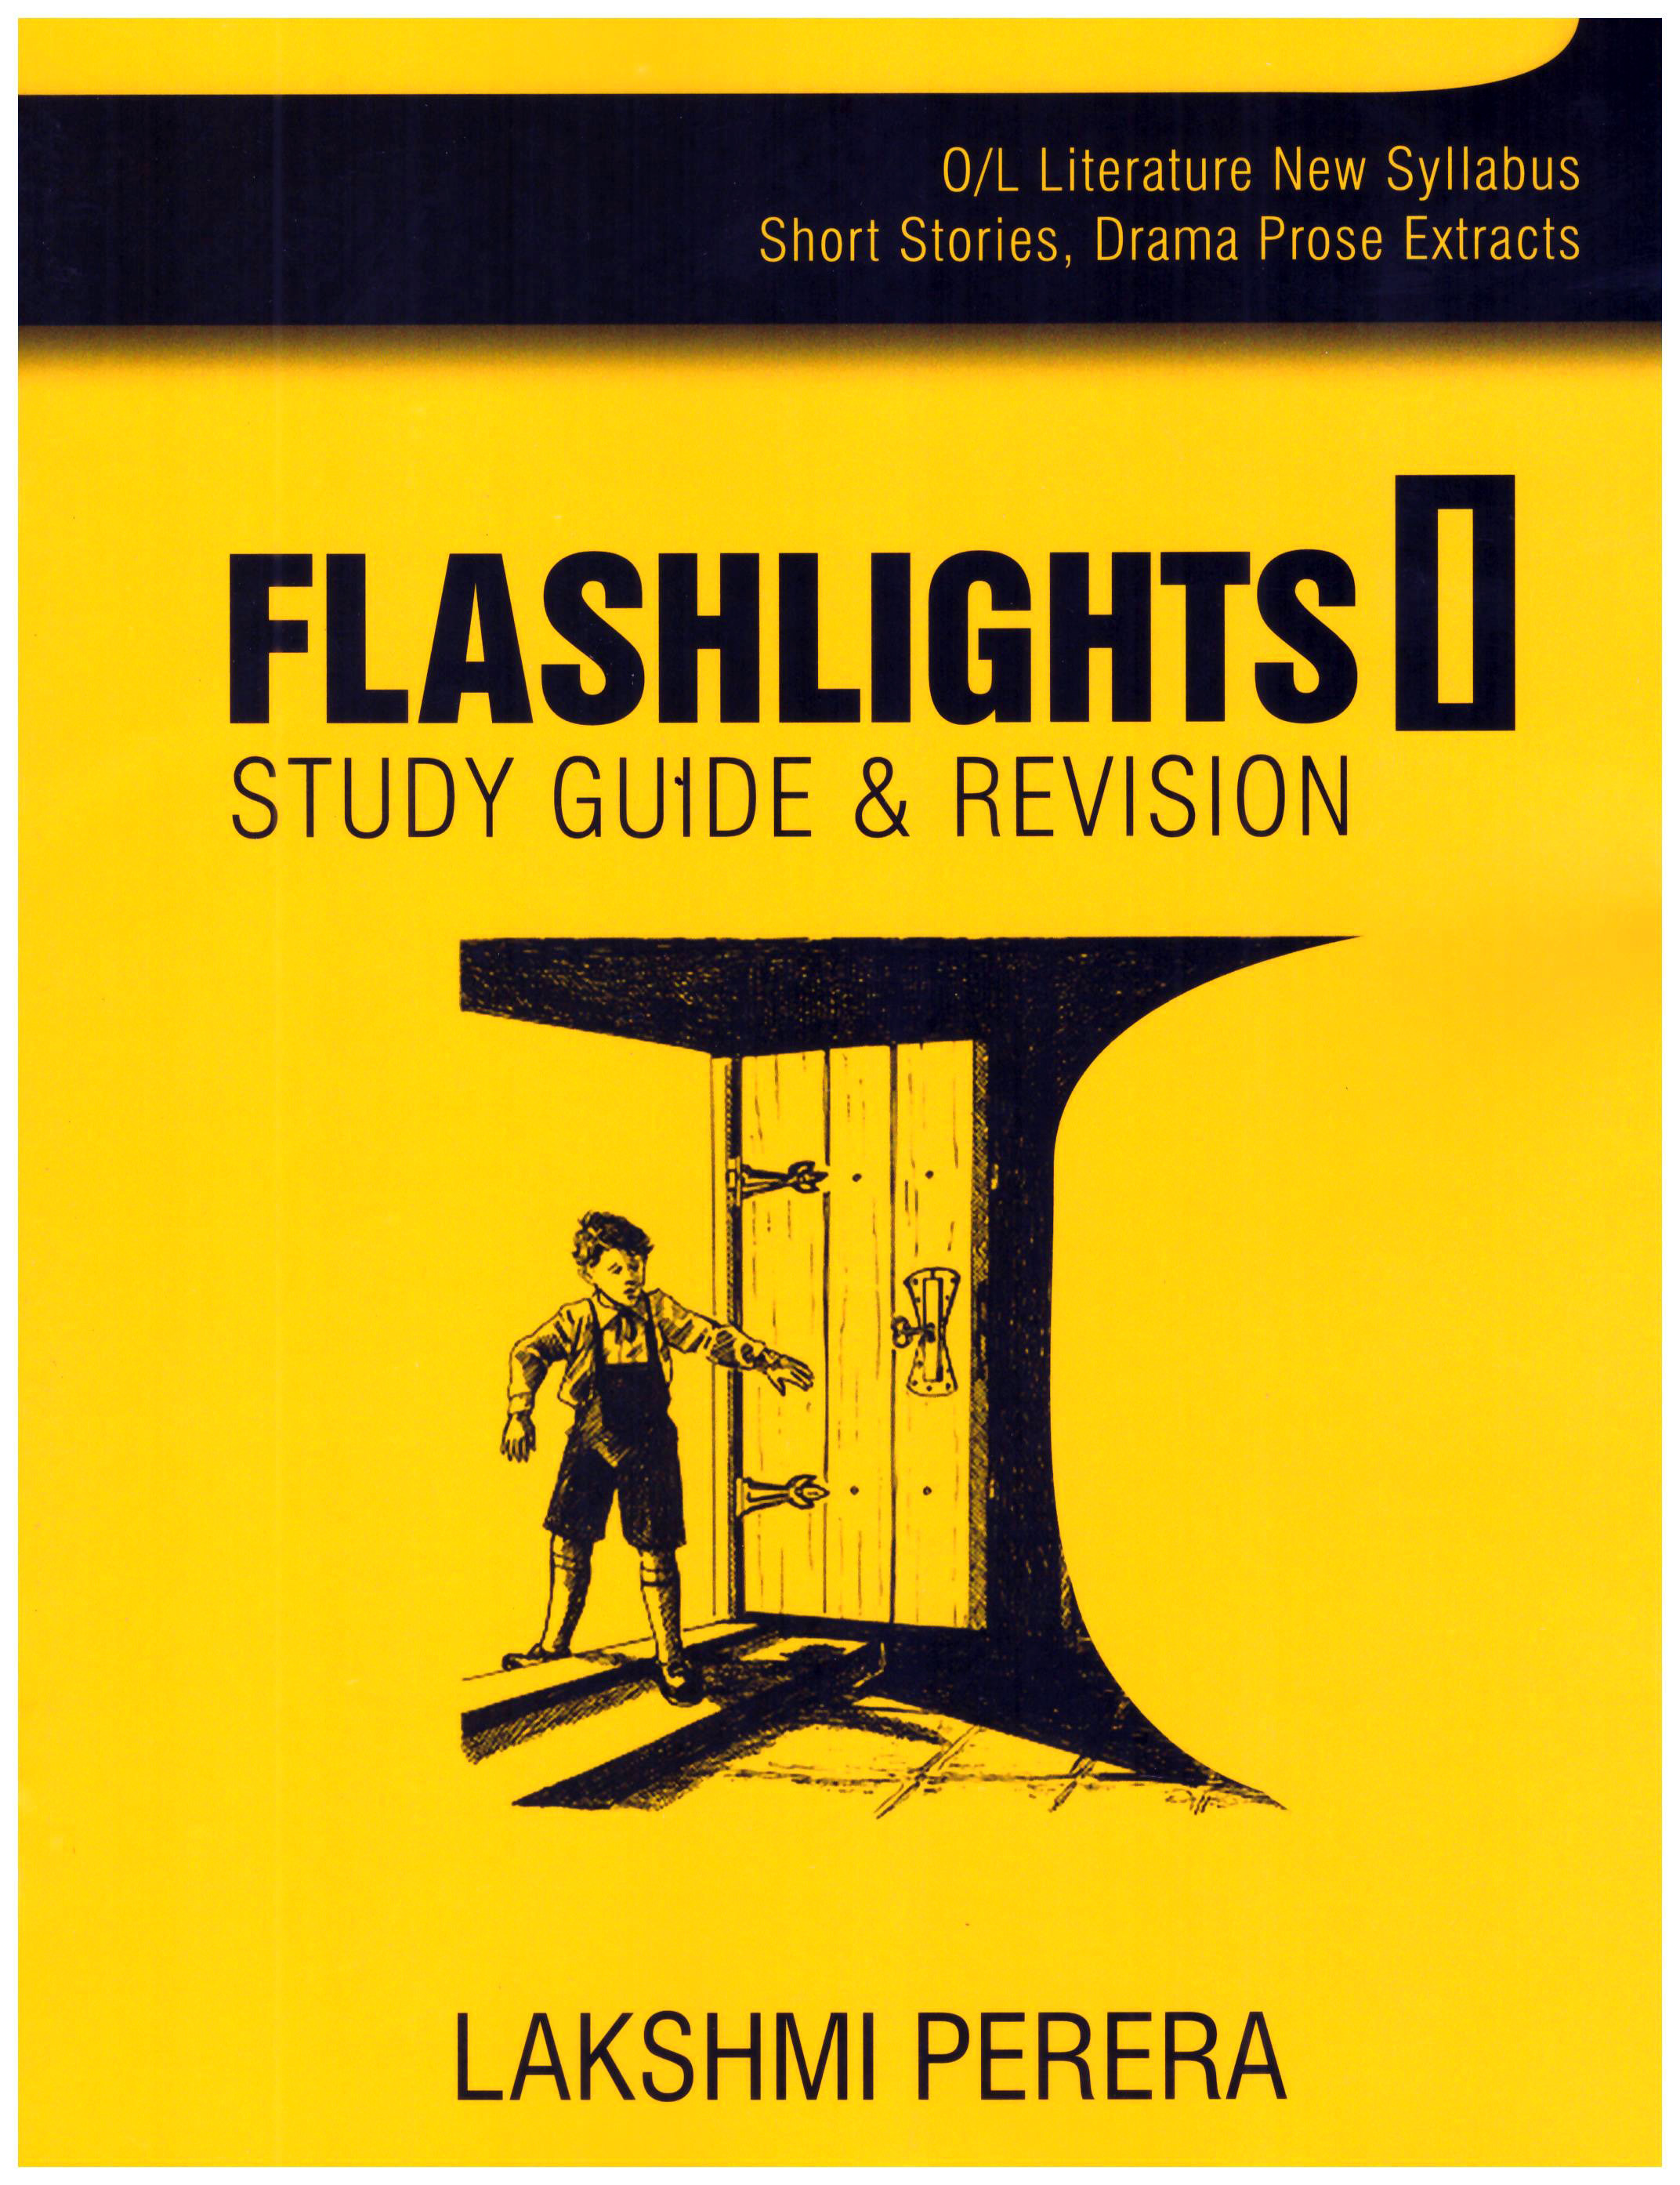 O/L Literature New Syllabus Flashlights 1 Study Guide and Revision Short Stories